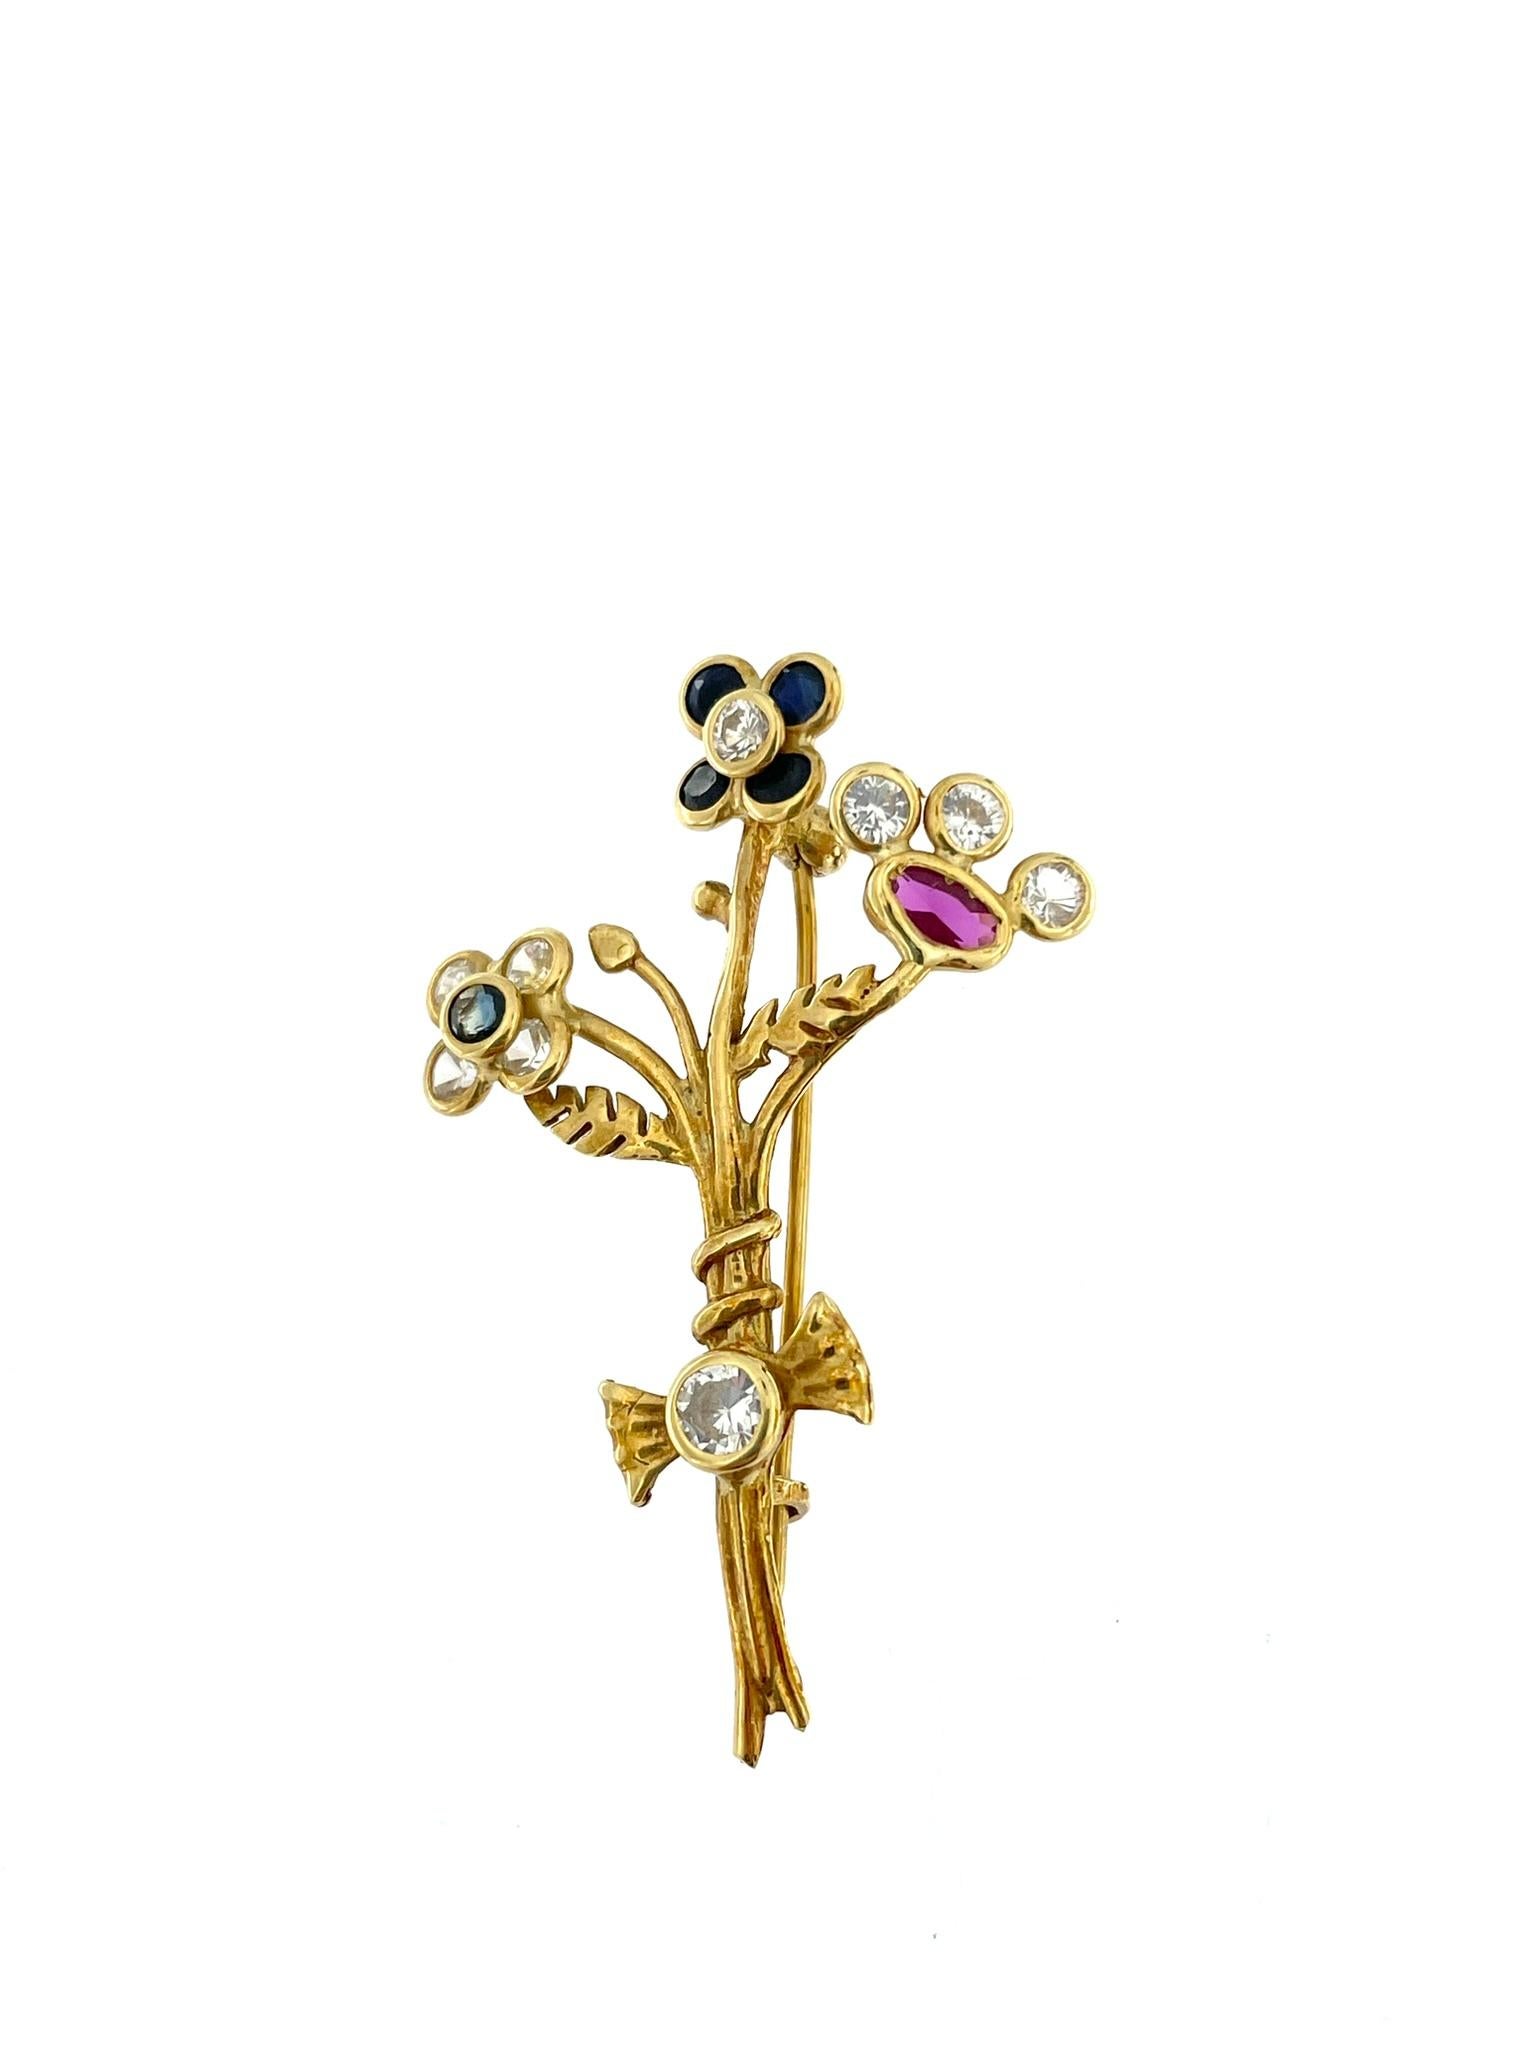 Artisan Handcrafted 18 karat Yellow Gold Brooch with Zircons and Quartz For Sale